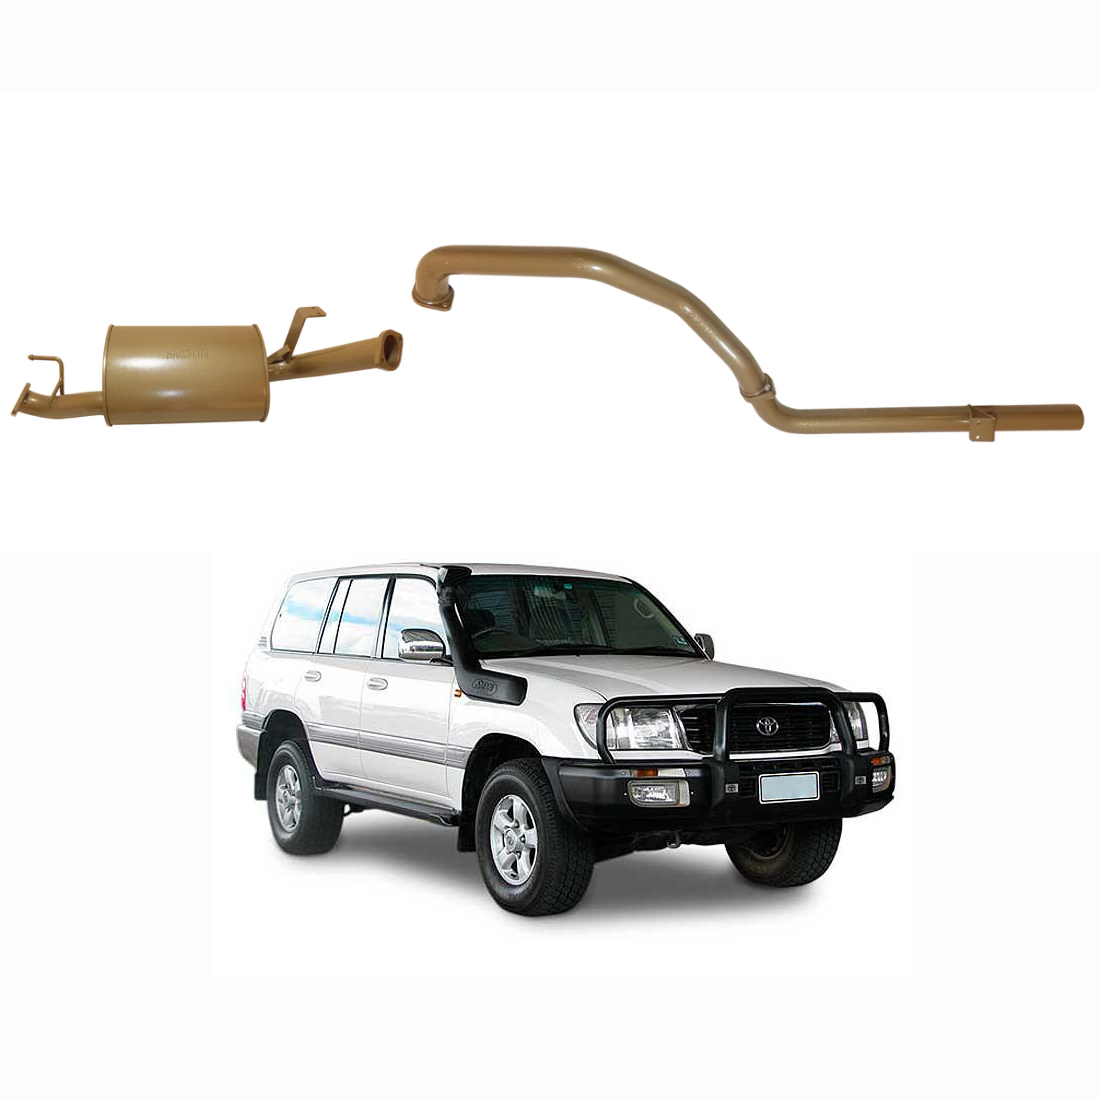 Toyota Landcruiser 100/105 Series 6 Cyl 4.2L Diesel 1998/2008 Non Turbo - Single 2 1/2" Exhaust image